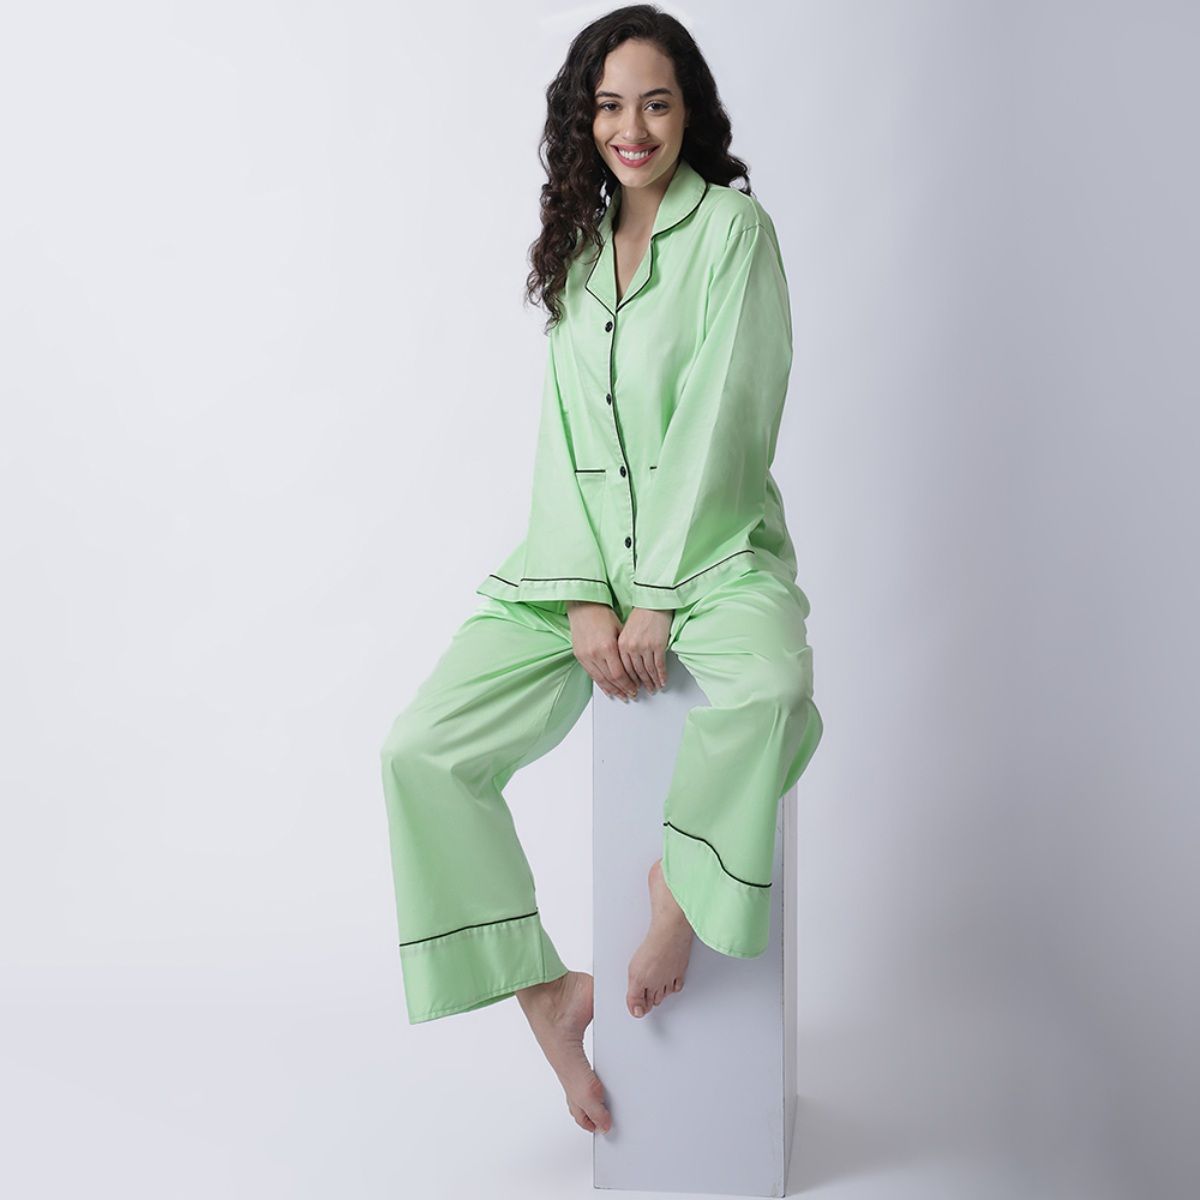 Aggregate 200+ green night suit